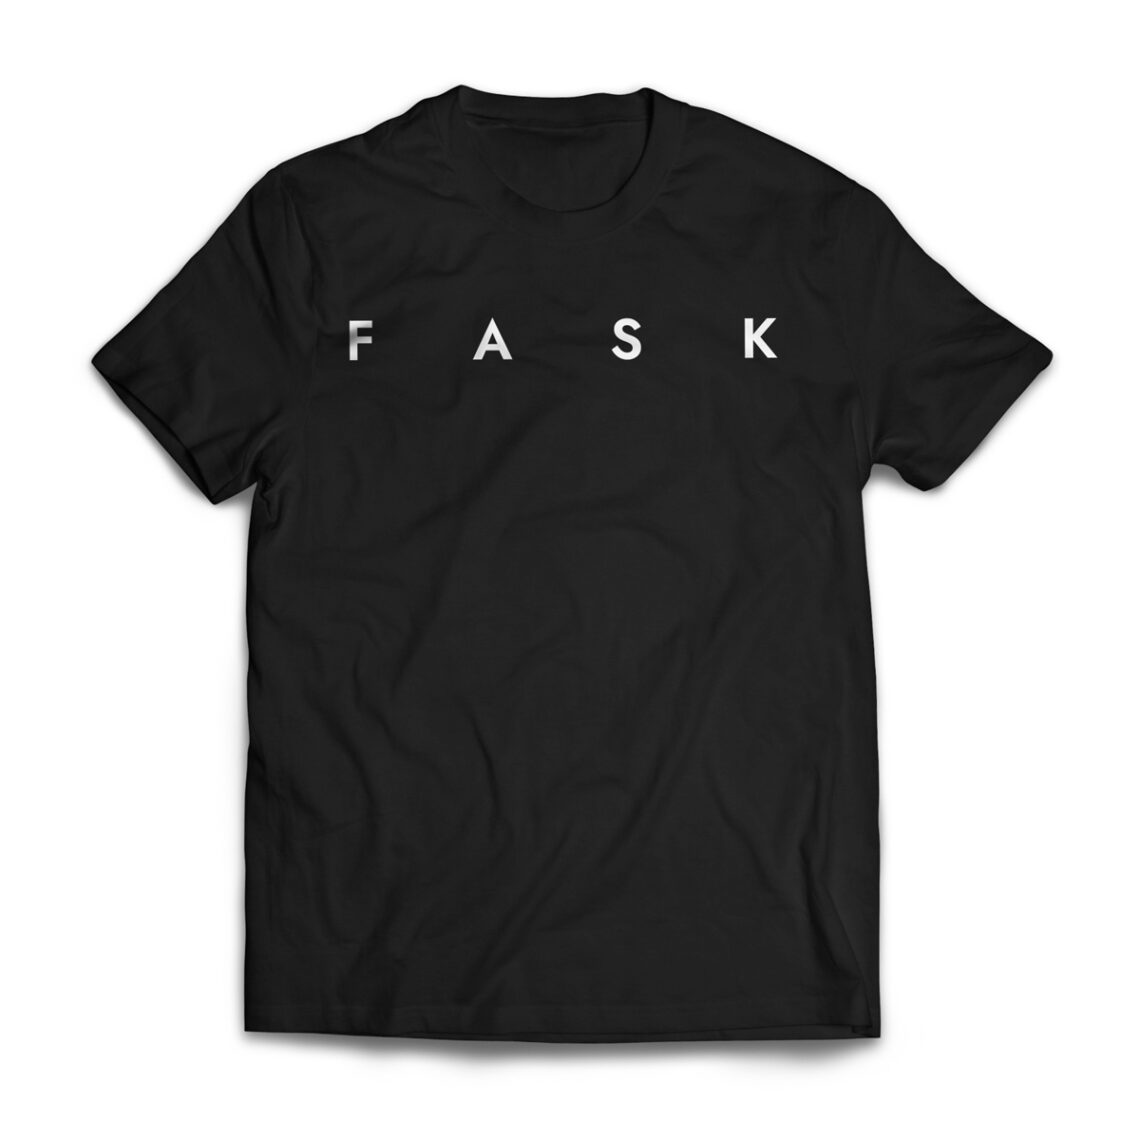 Fast Animals And Slow Kids - T-Shirt Black 'FASK'